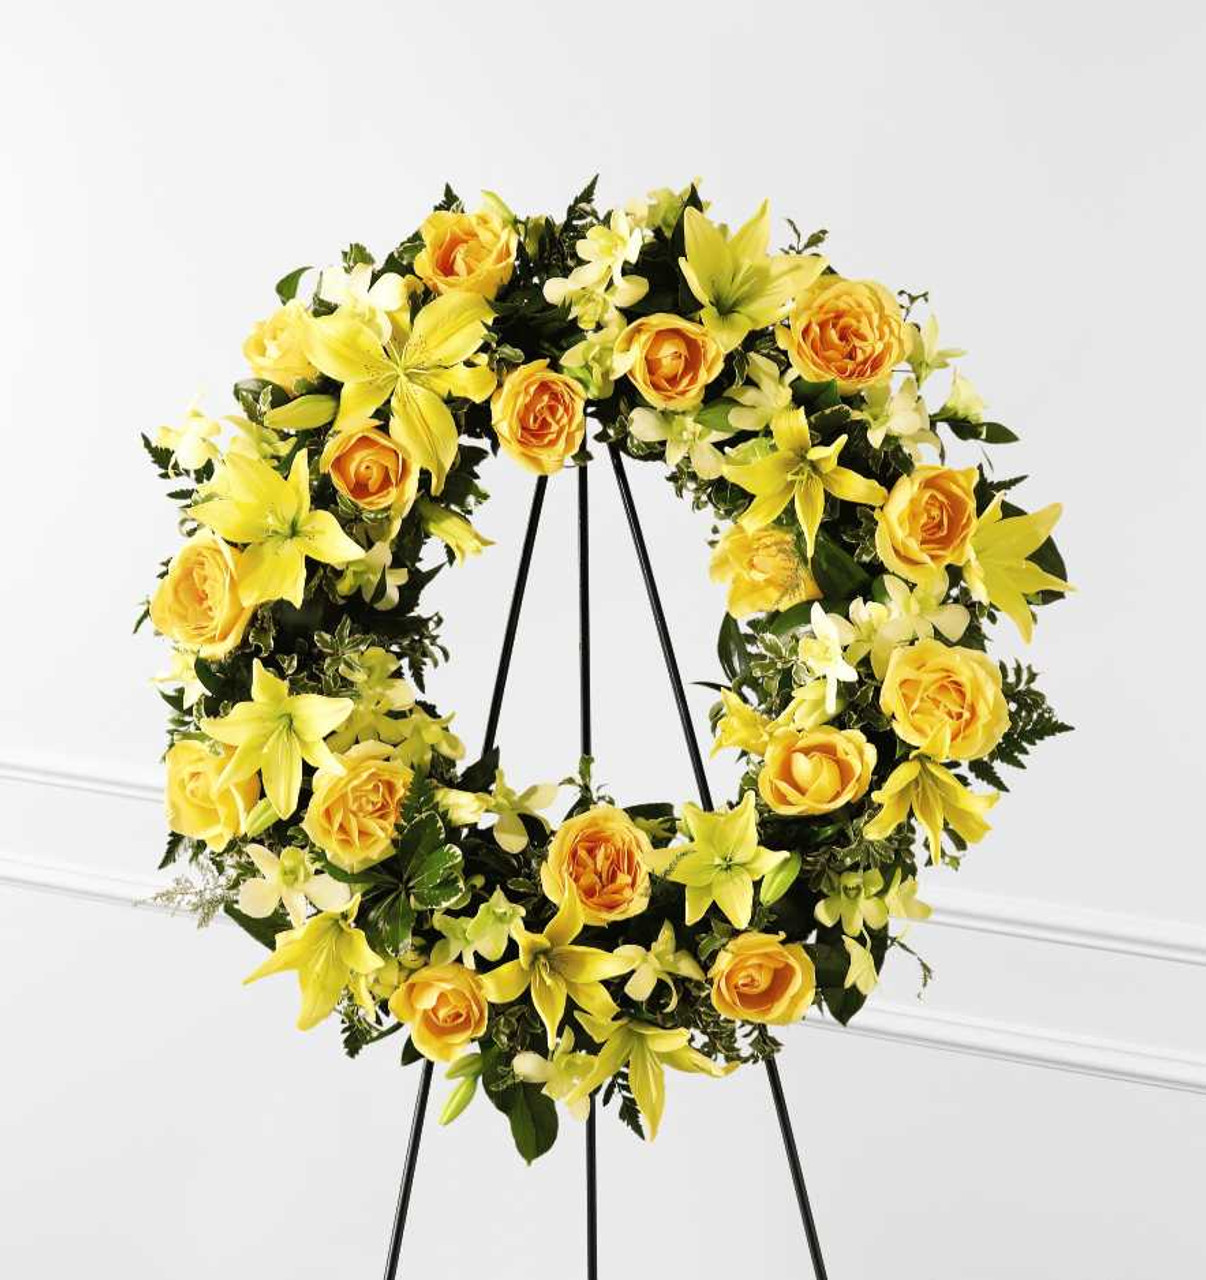 FTD Wreath of Remembrance  Pesches Flowers & Garden Center